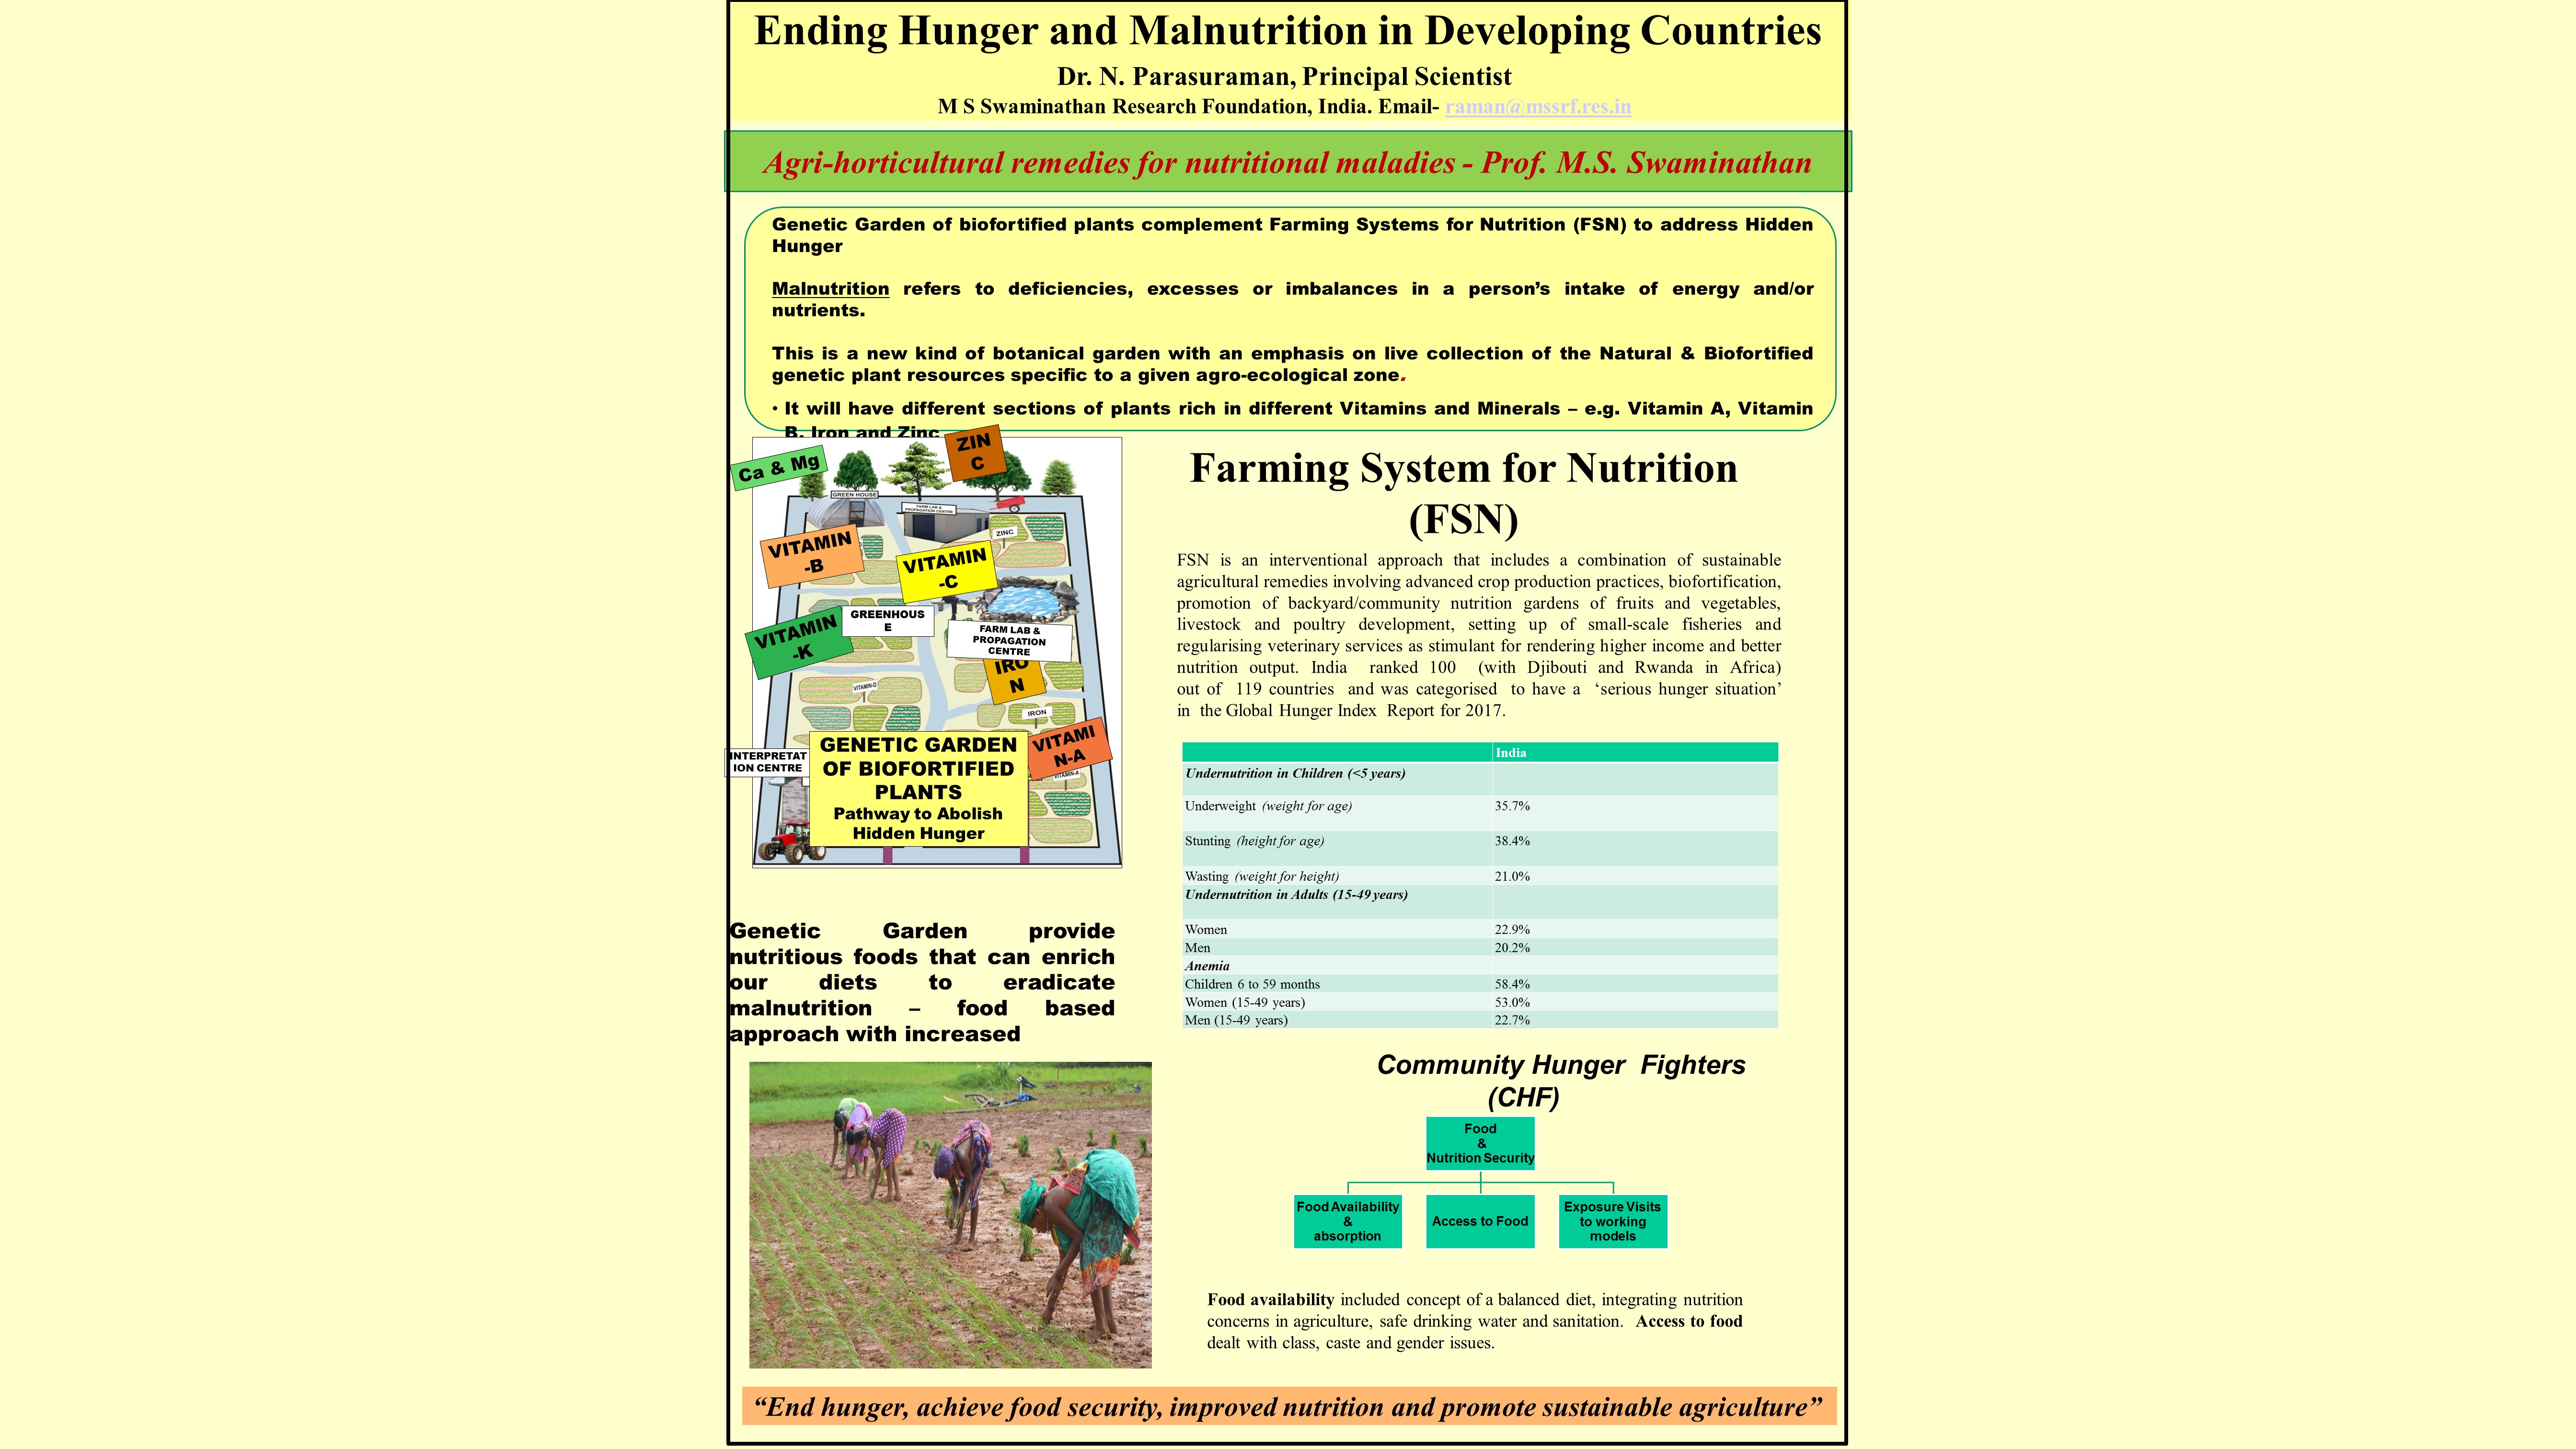 Ending Hunger and Malnutrition in Developing Countries